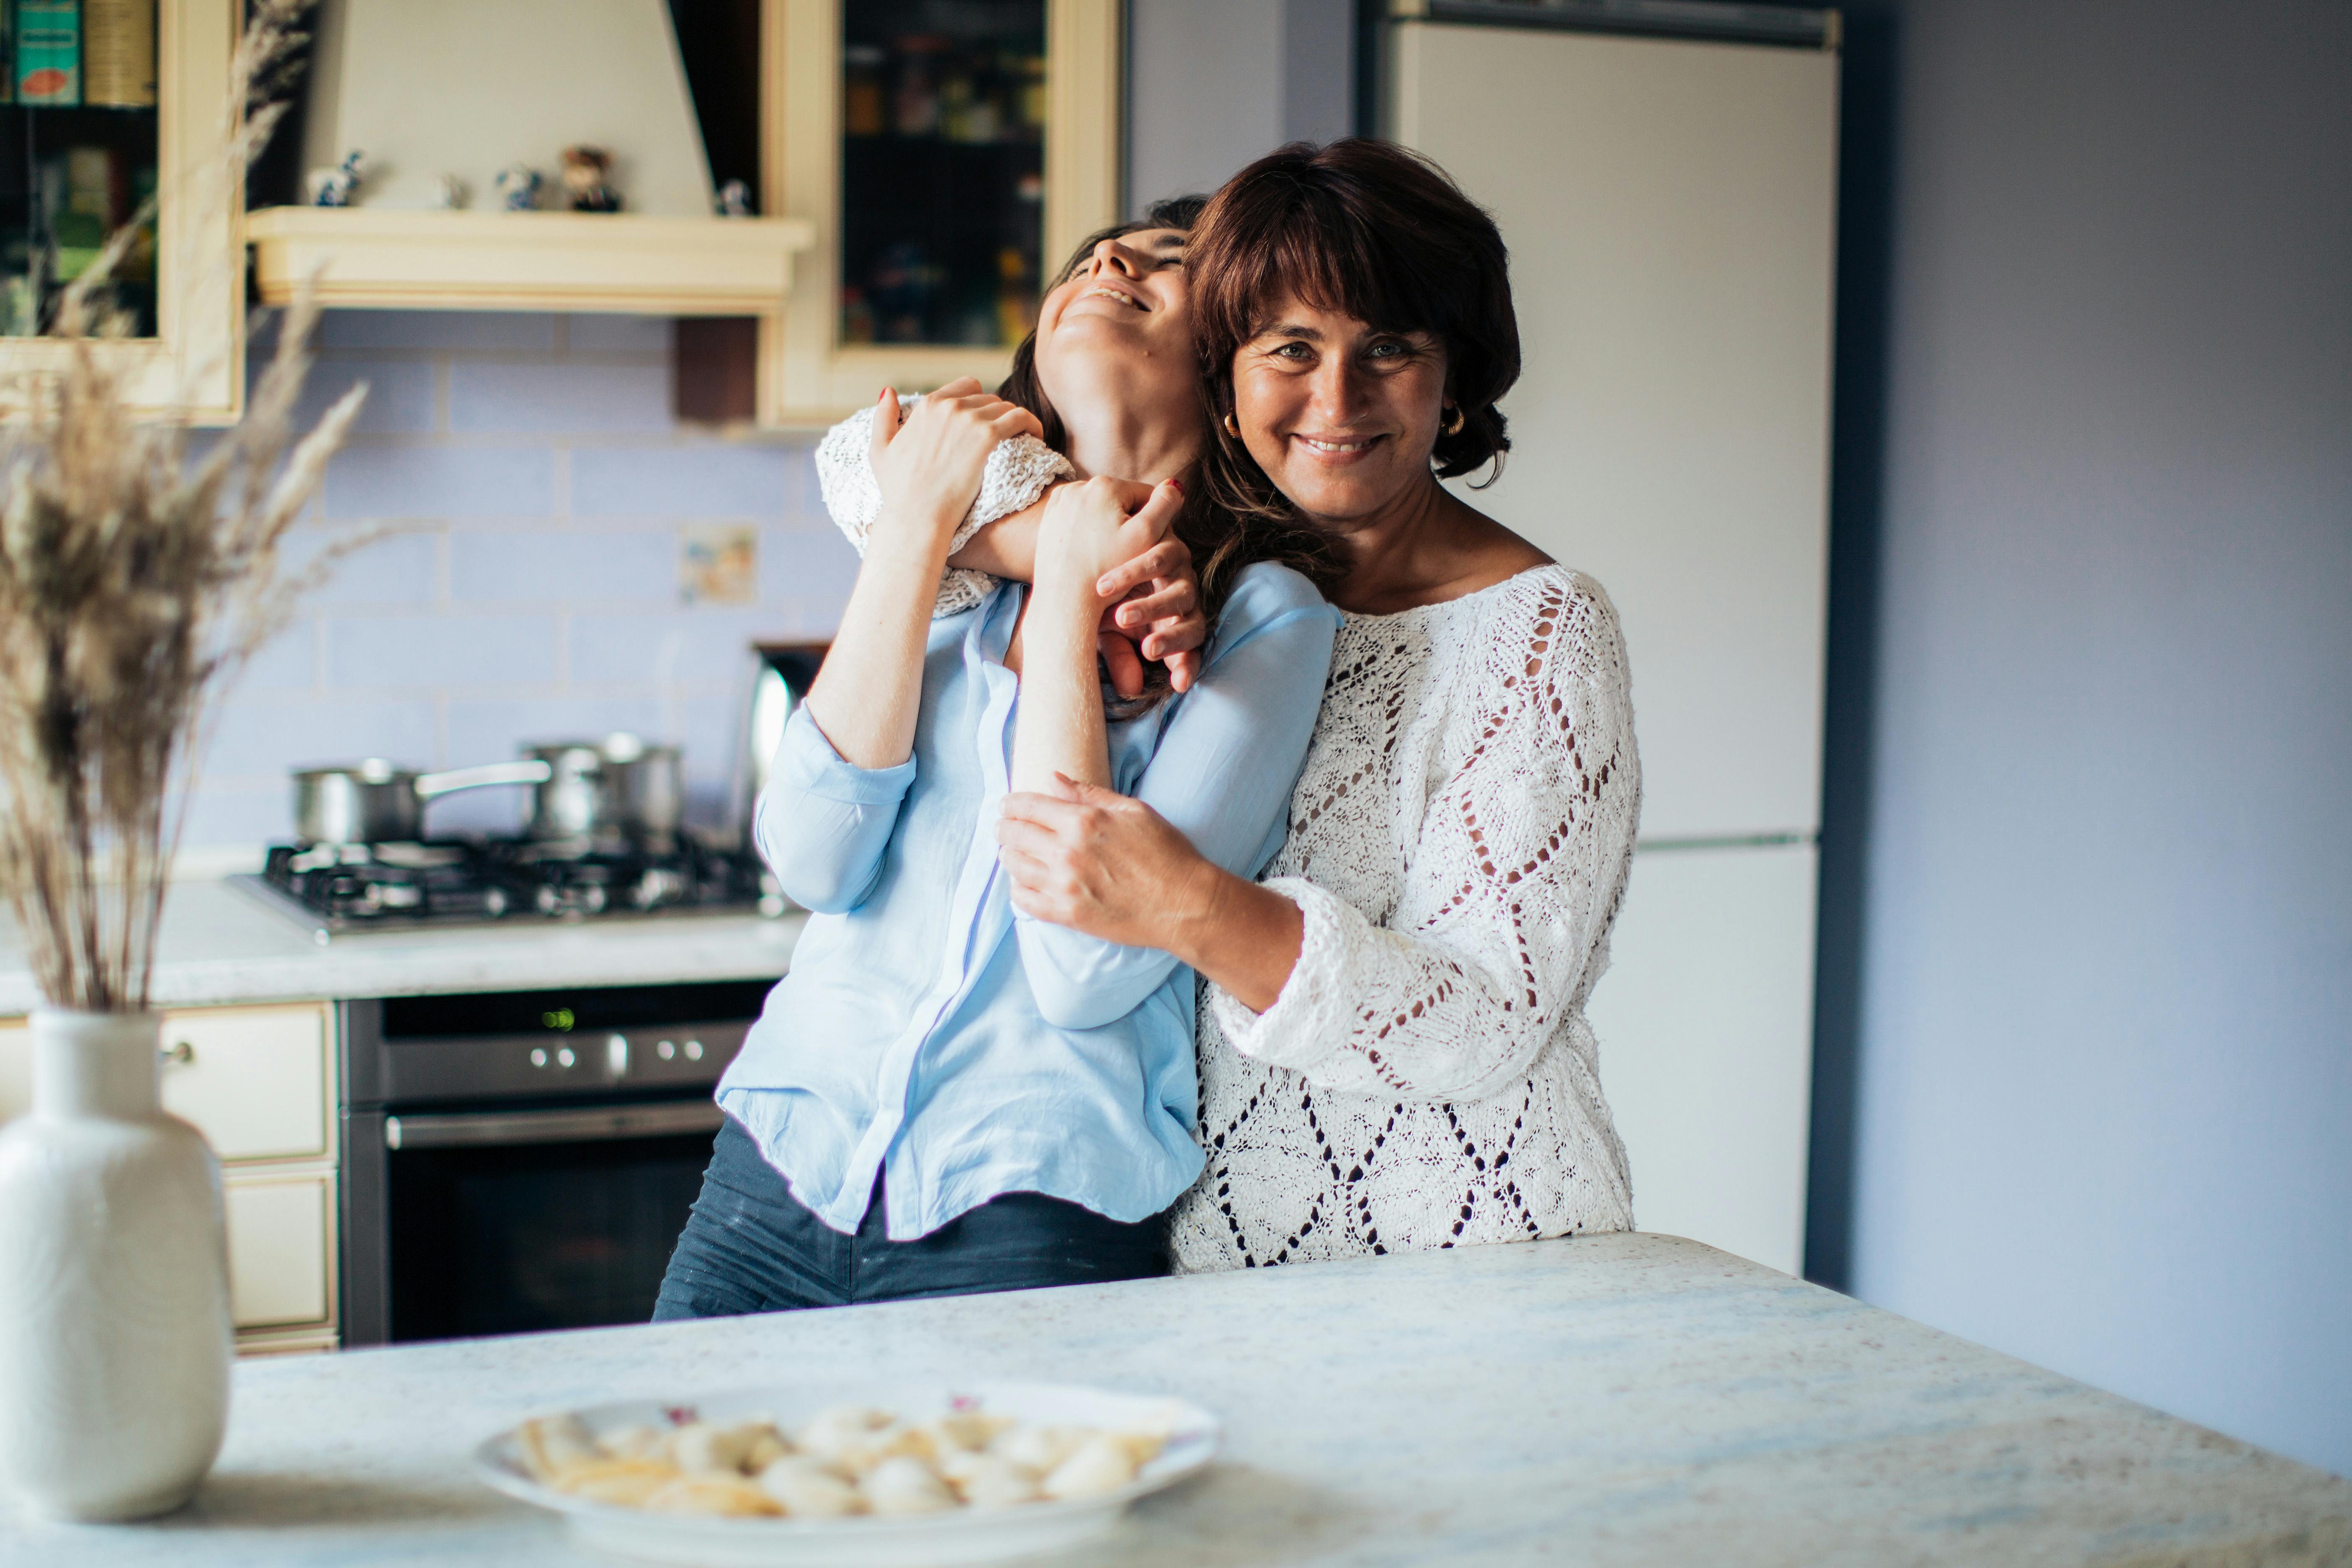 A mother and daughter hugging | Source: Pexels